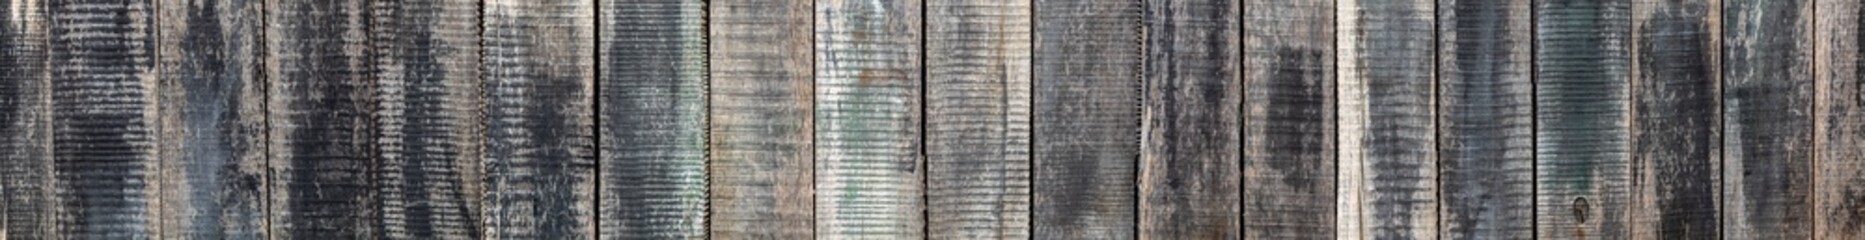 Old Weathered Wooden Panels